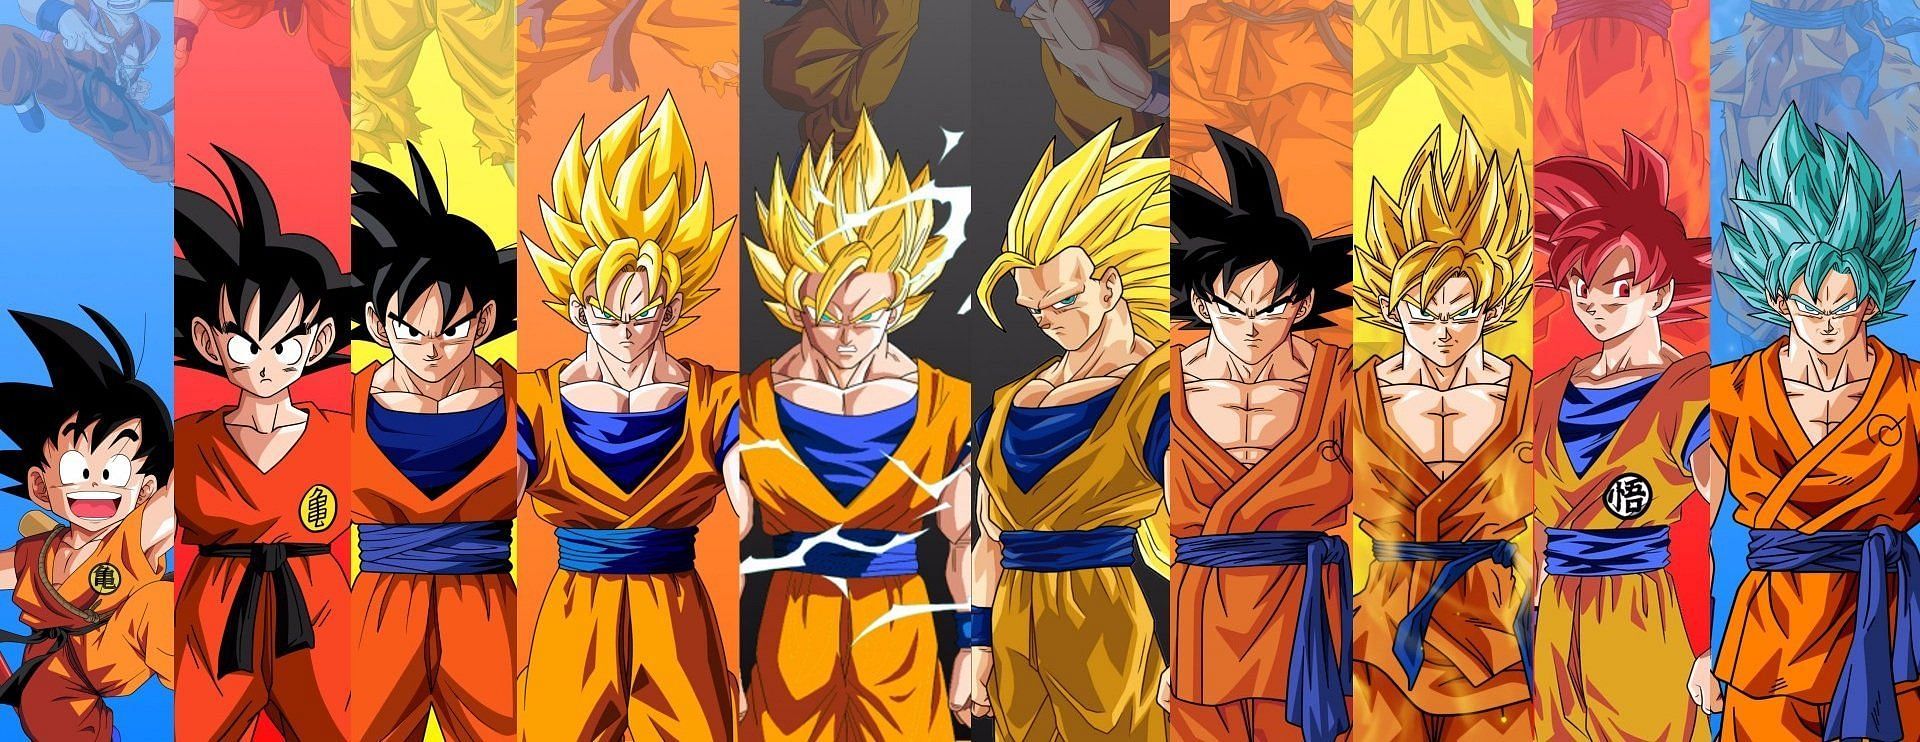 What is Goku's strongest form as of 2021?